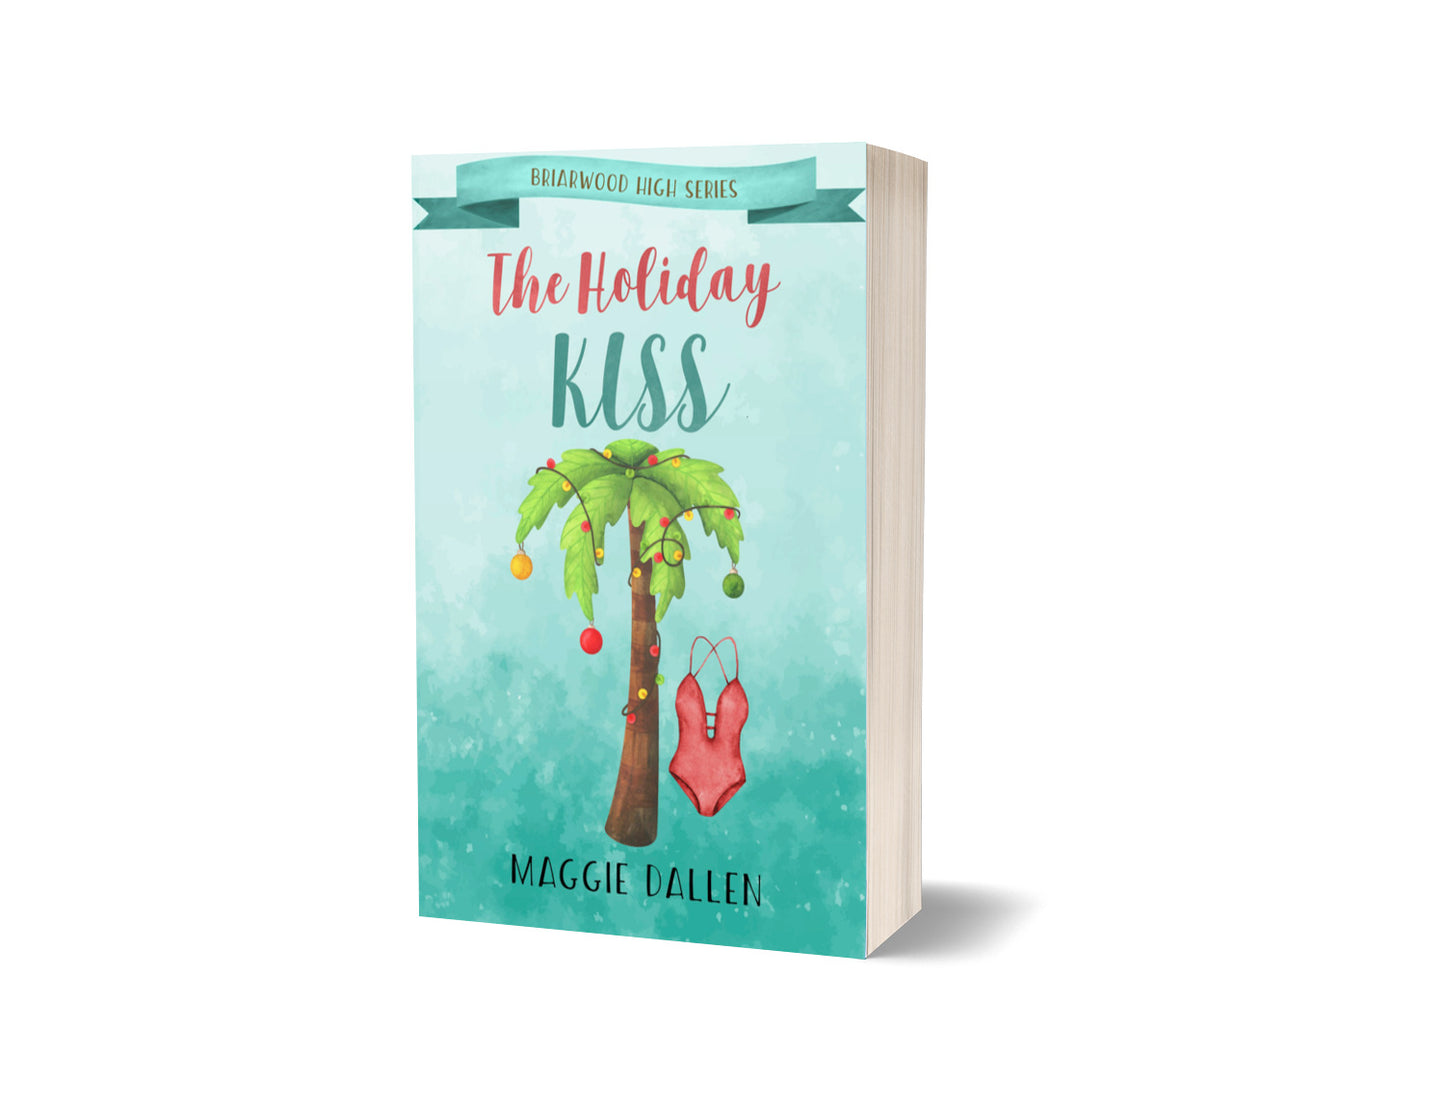 The Holiday Kiss